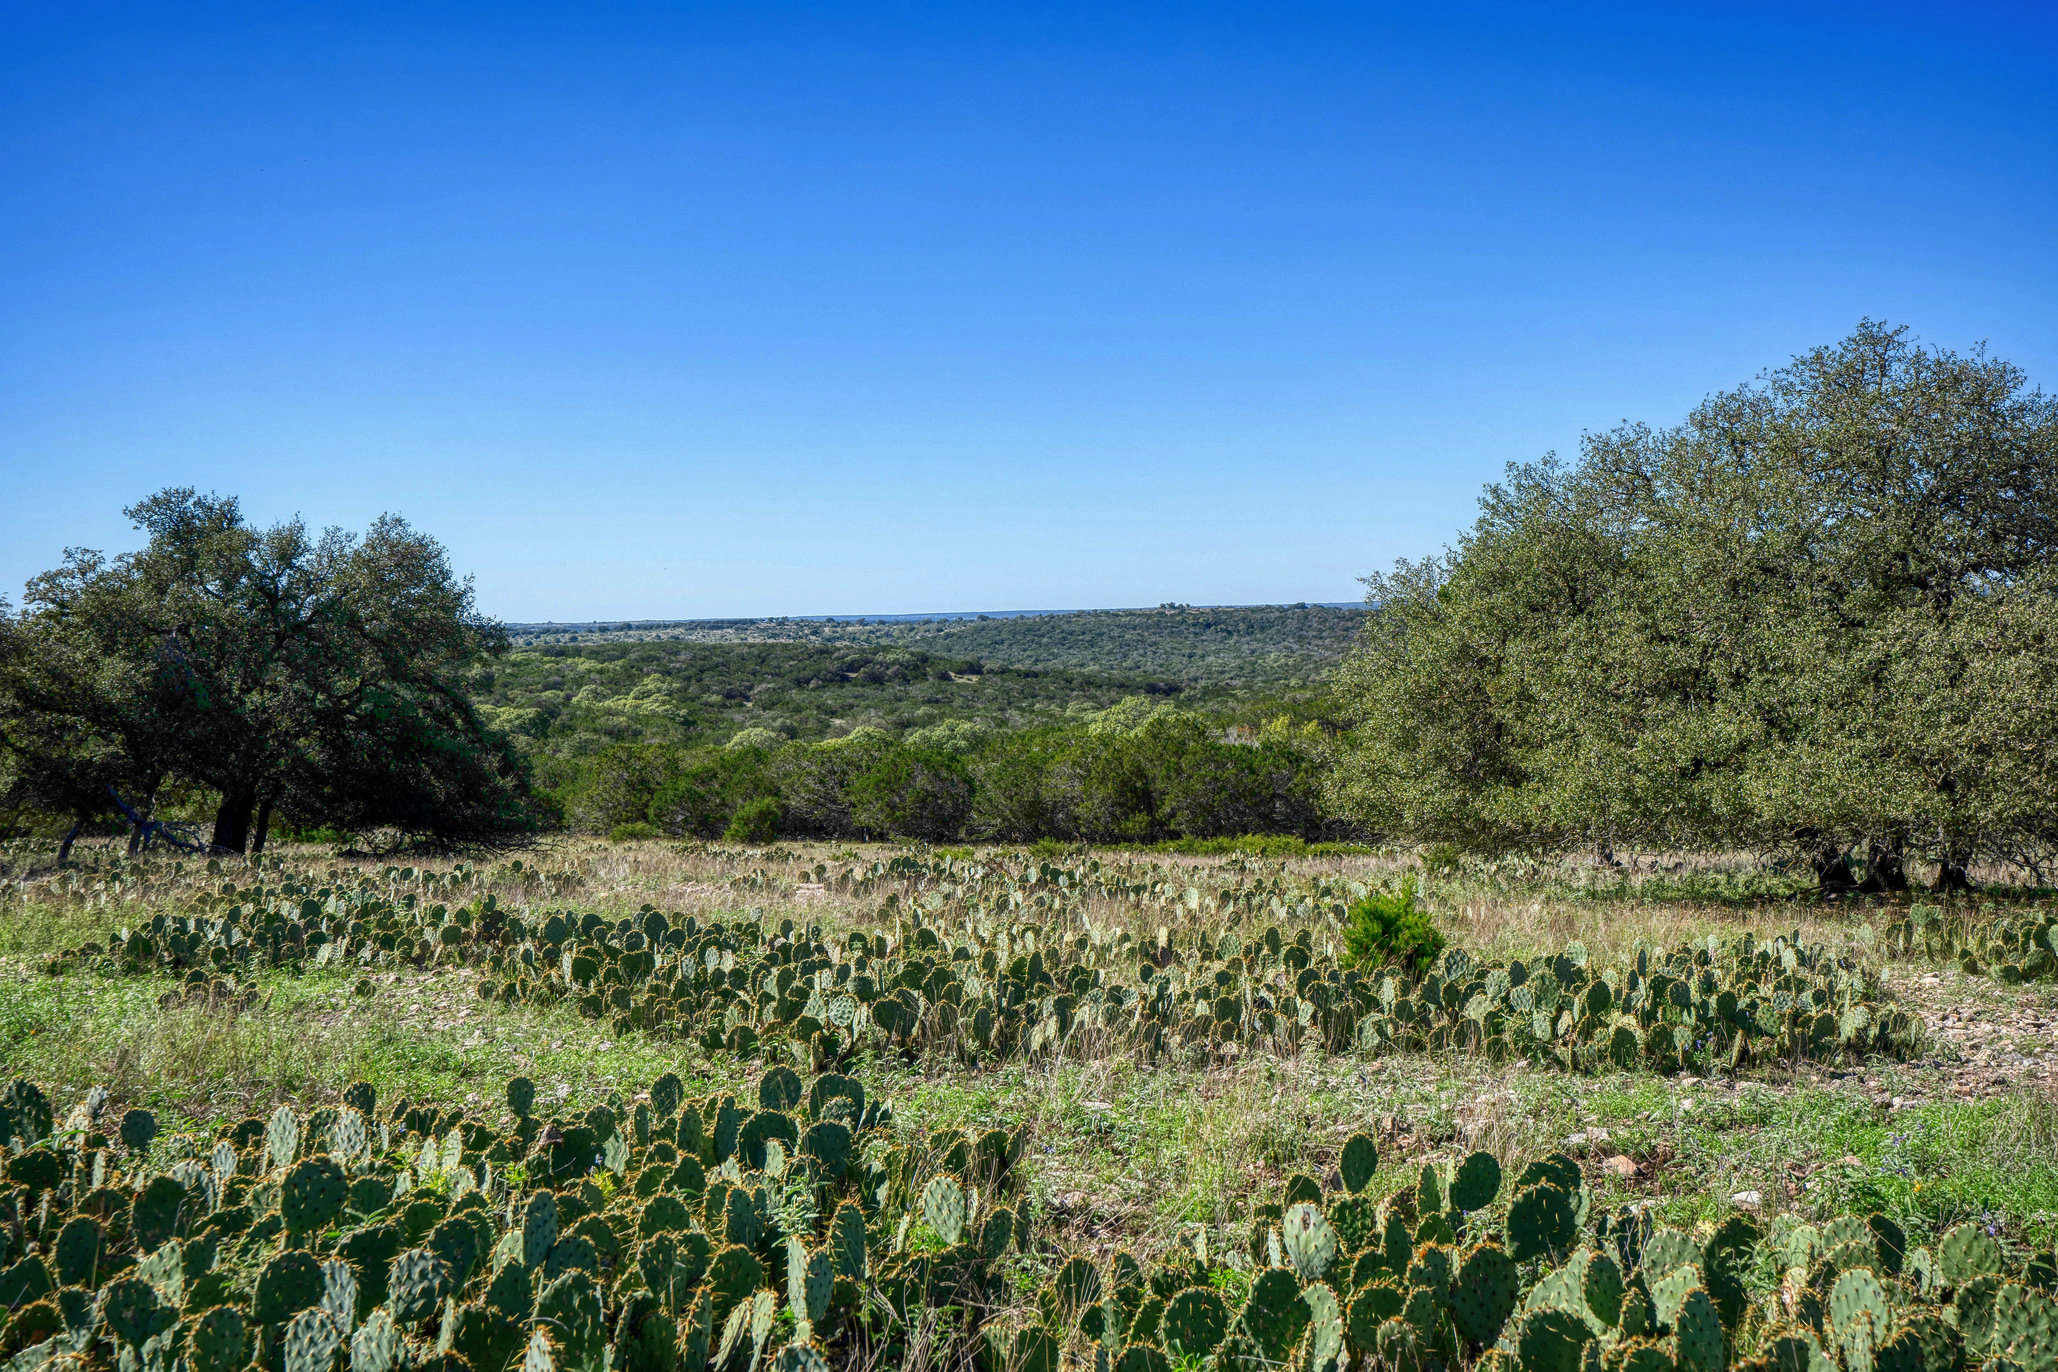 205 Acres at Rocky Ridge Ranch. Listed by Gail Stone Realty 830-796-4640